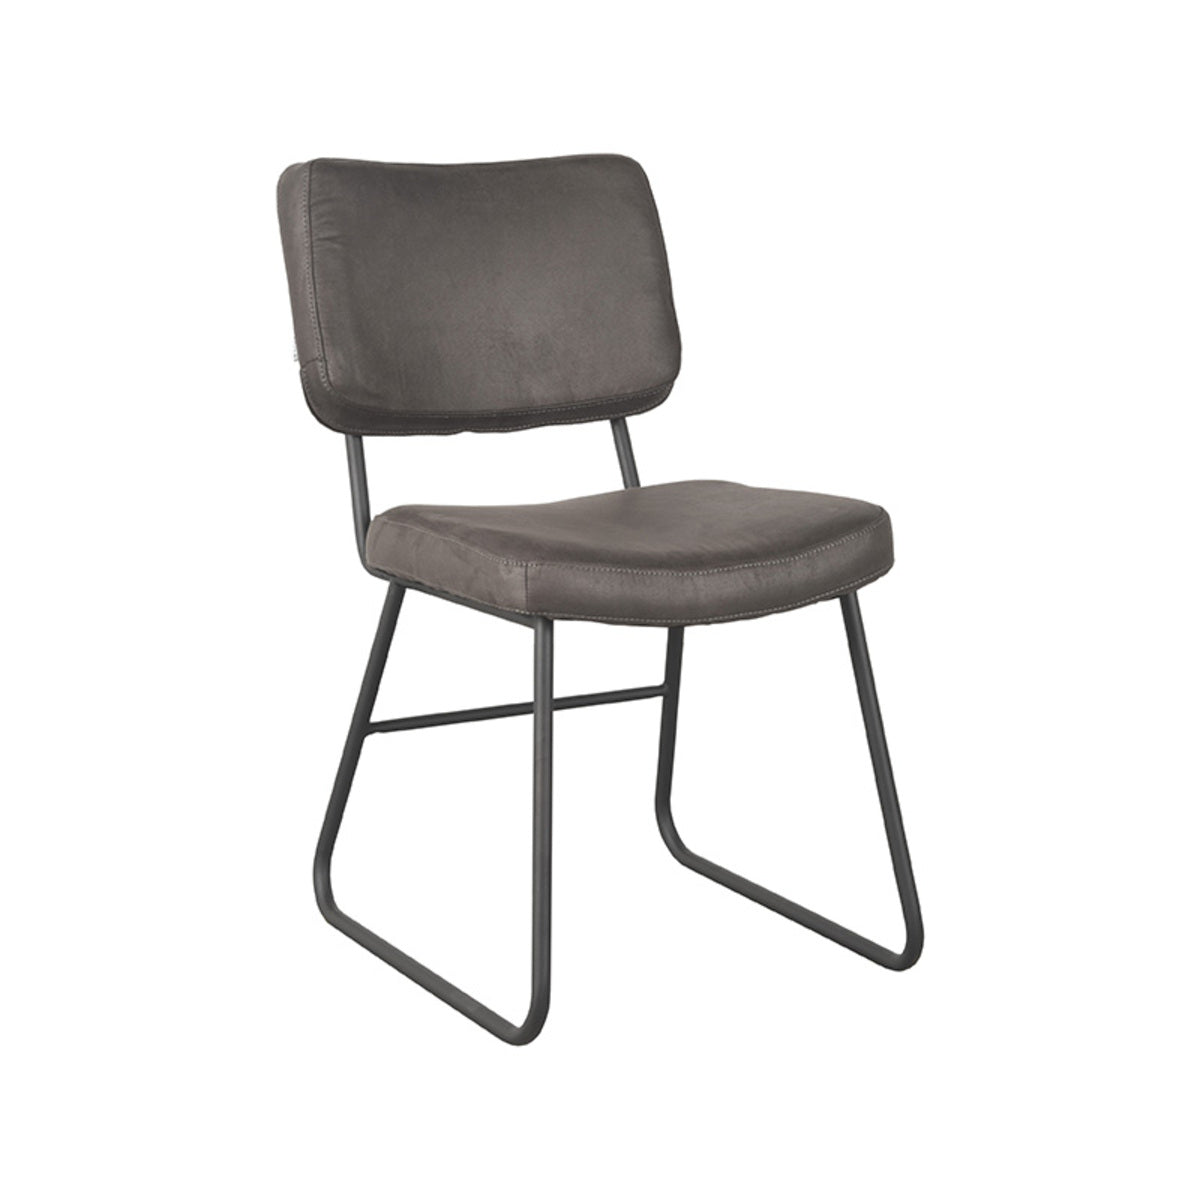 LABEL51 Dining room chair Noah - Anthracite - Microfiber | 2 pieces